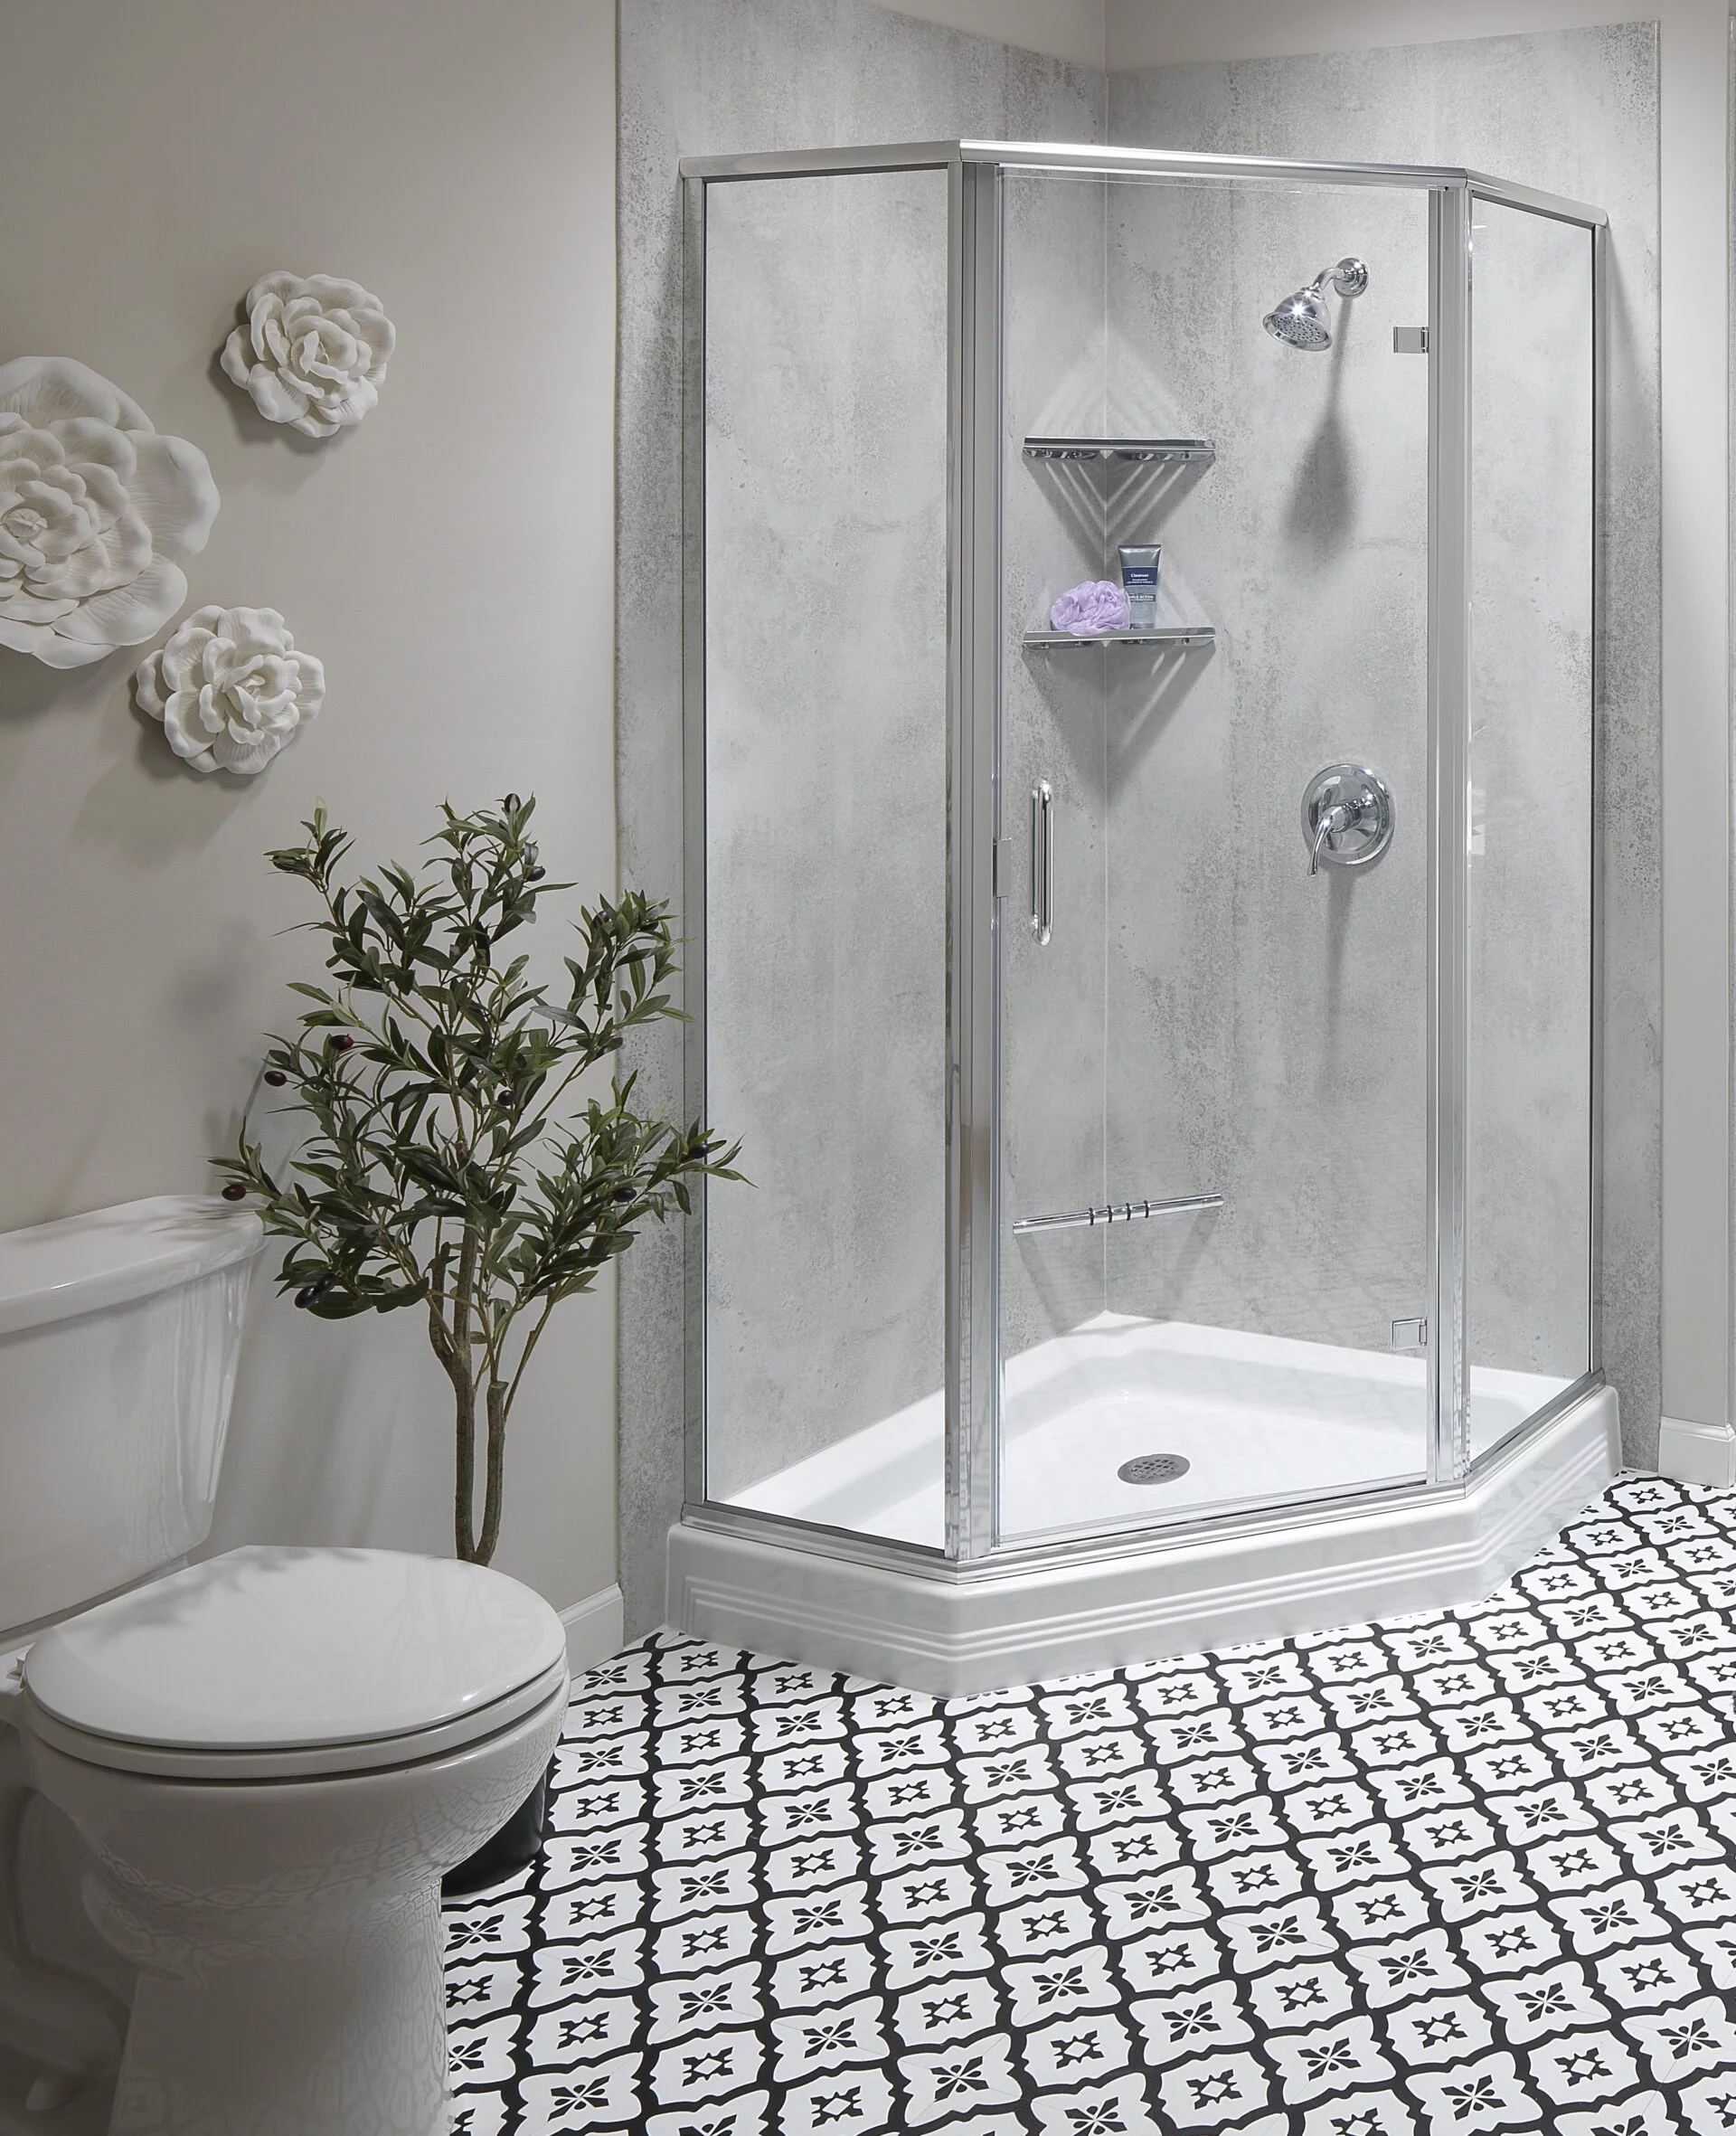 bathroom remodeling in lakes of the four seasons; bathroom remodeling in kingsford heights; bathroom remodeling in lake dalecarlia; bathroom remodeling in long beach; bathroom remodeling in michiana shores; bathroom designers; bathroom remodel ideas